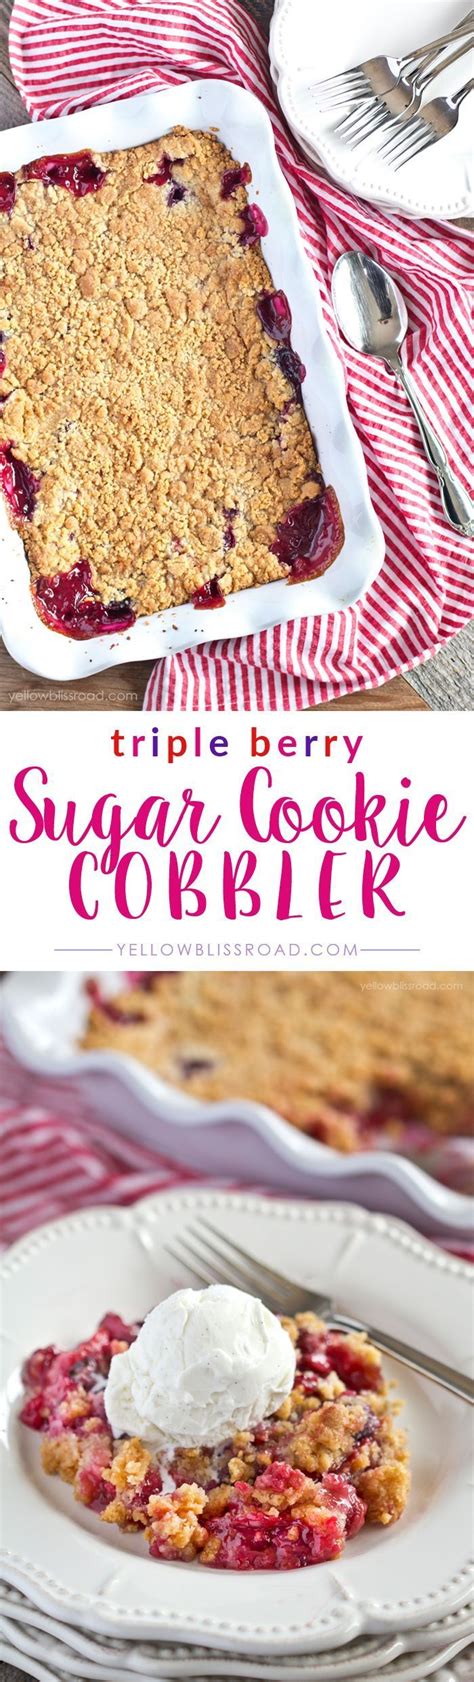 Triple Berry Sugar Cookie Cobbler Yellow Bliss Road Desserts